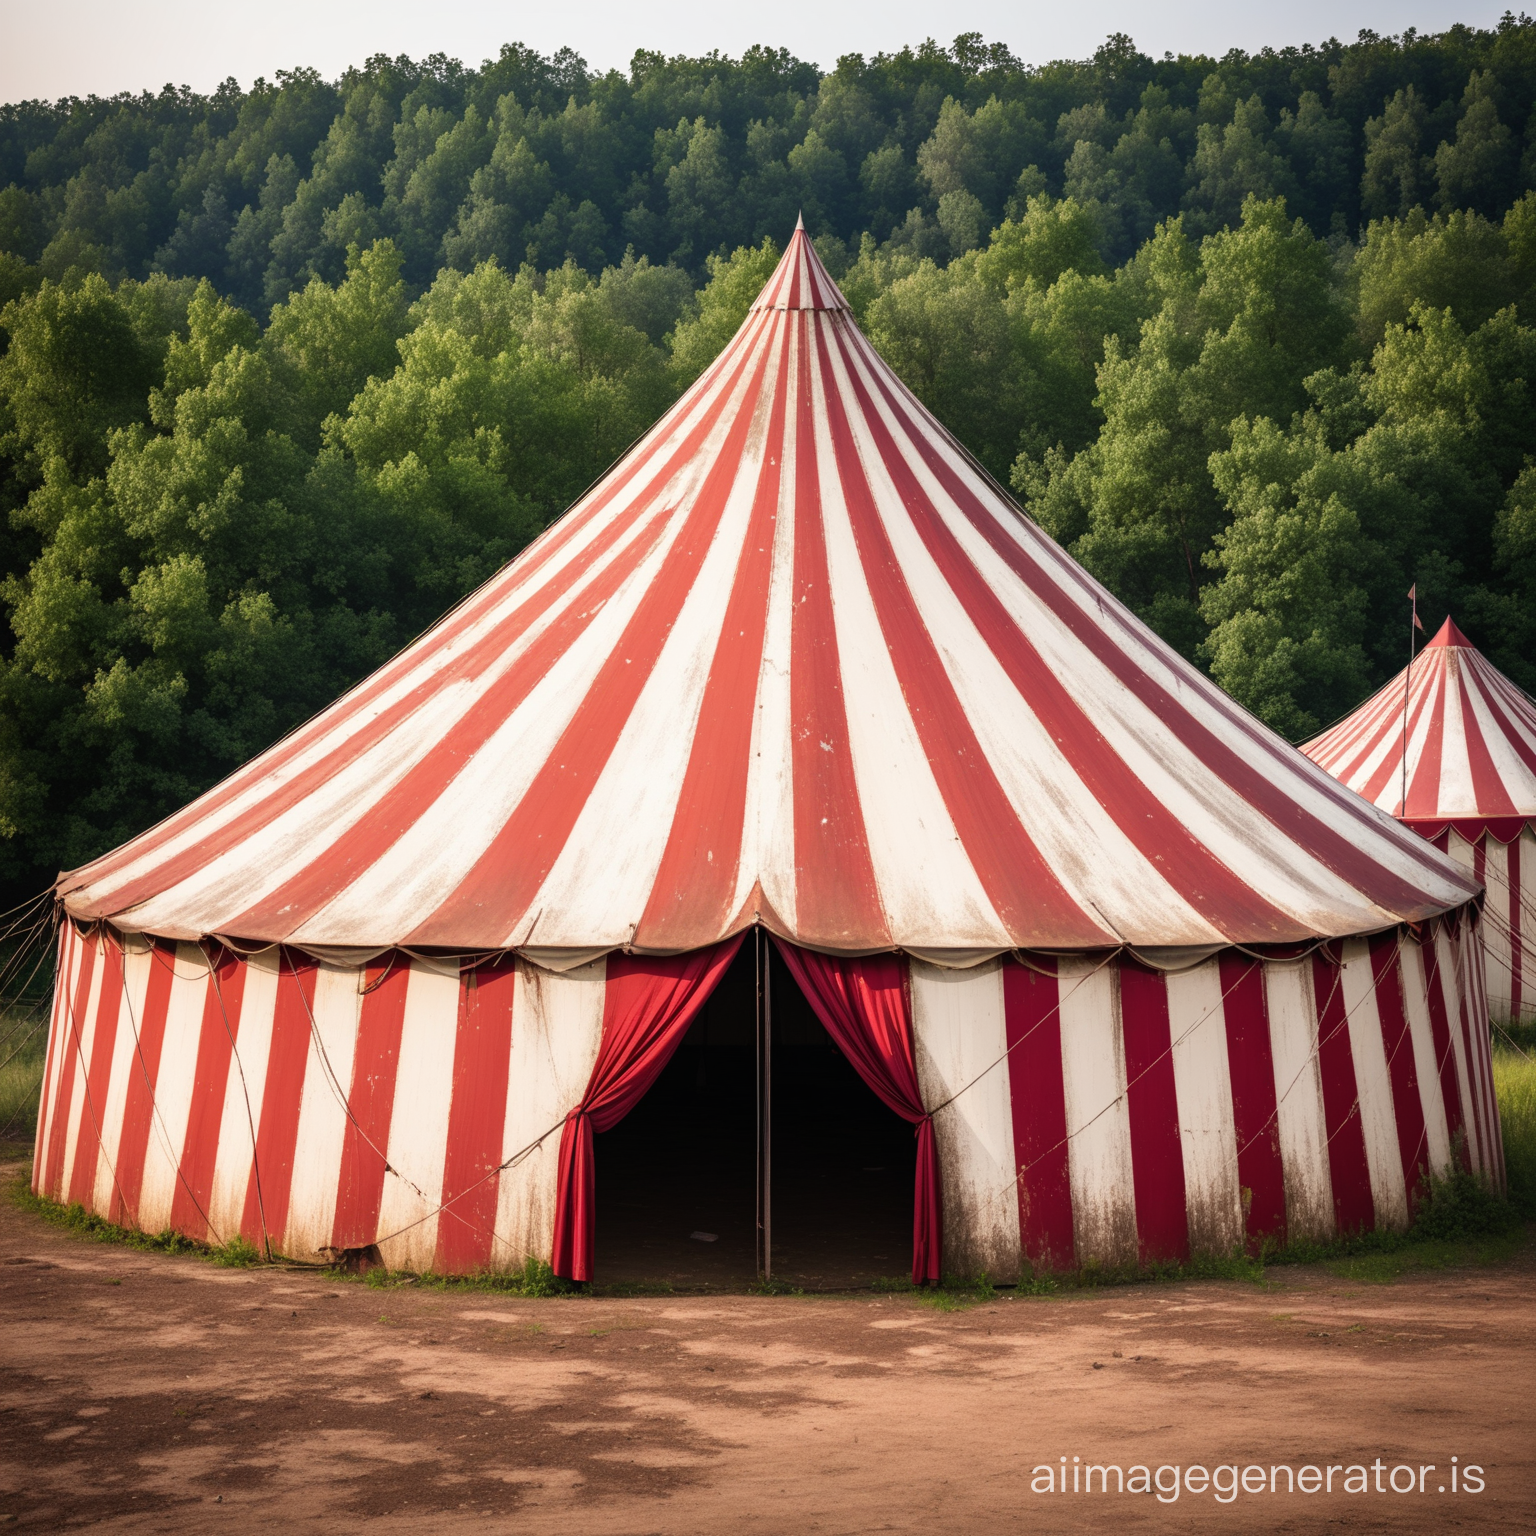 an old dirty abandoned red and white striped circus tent